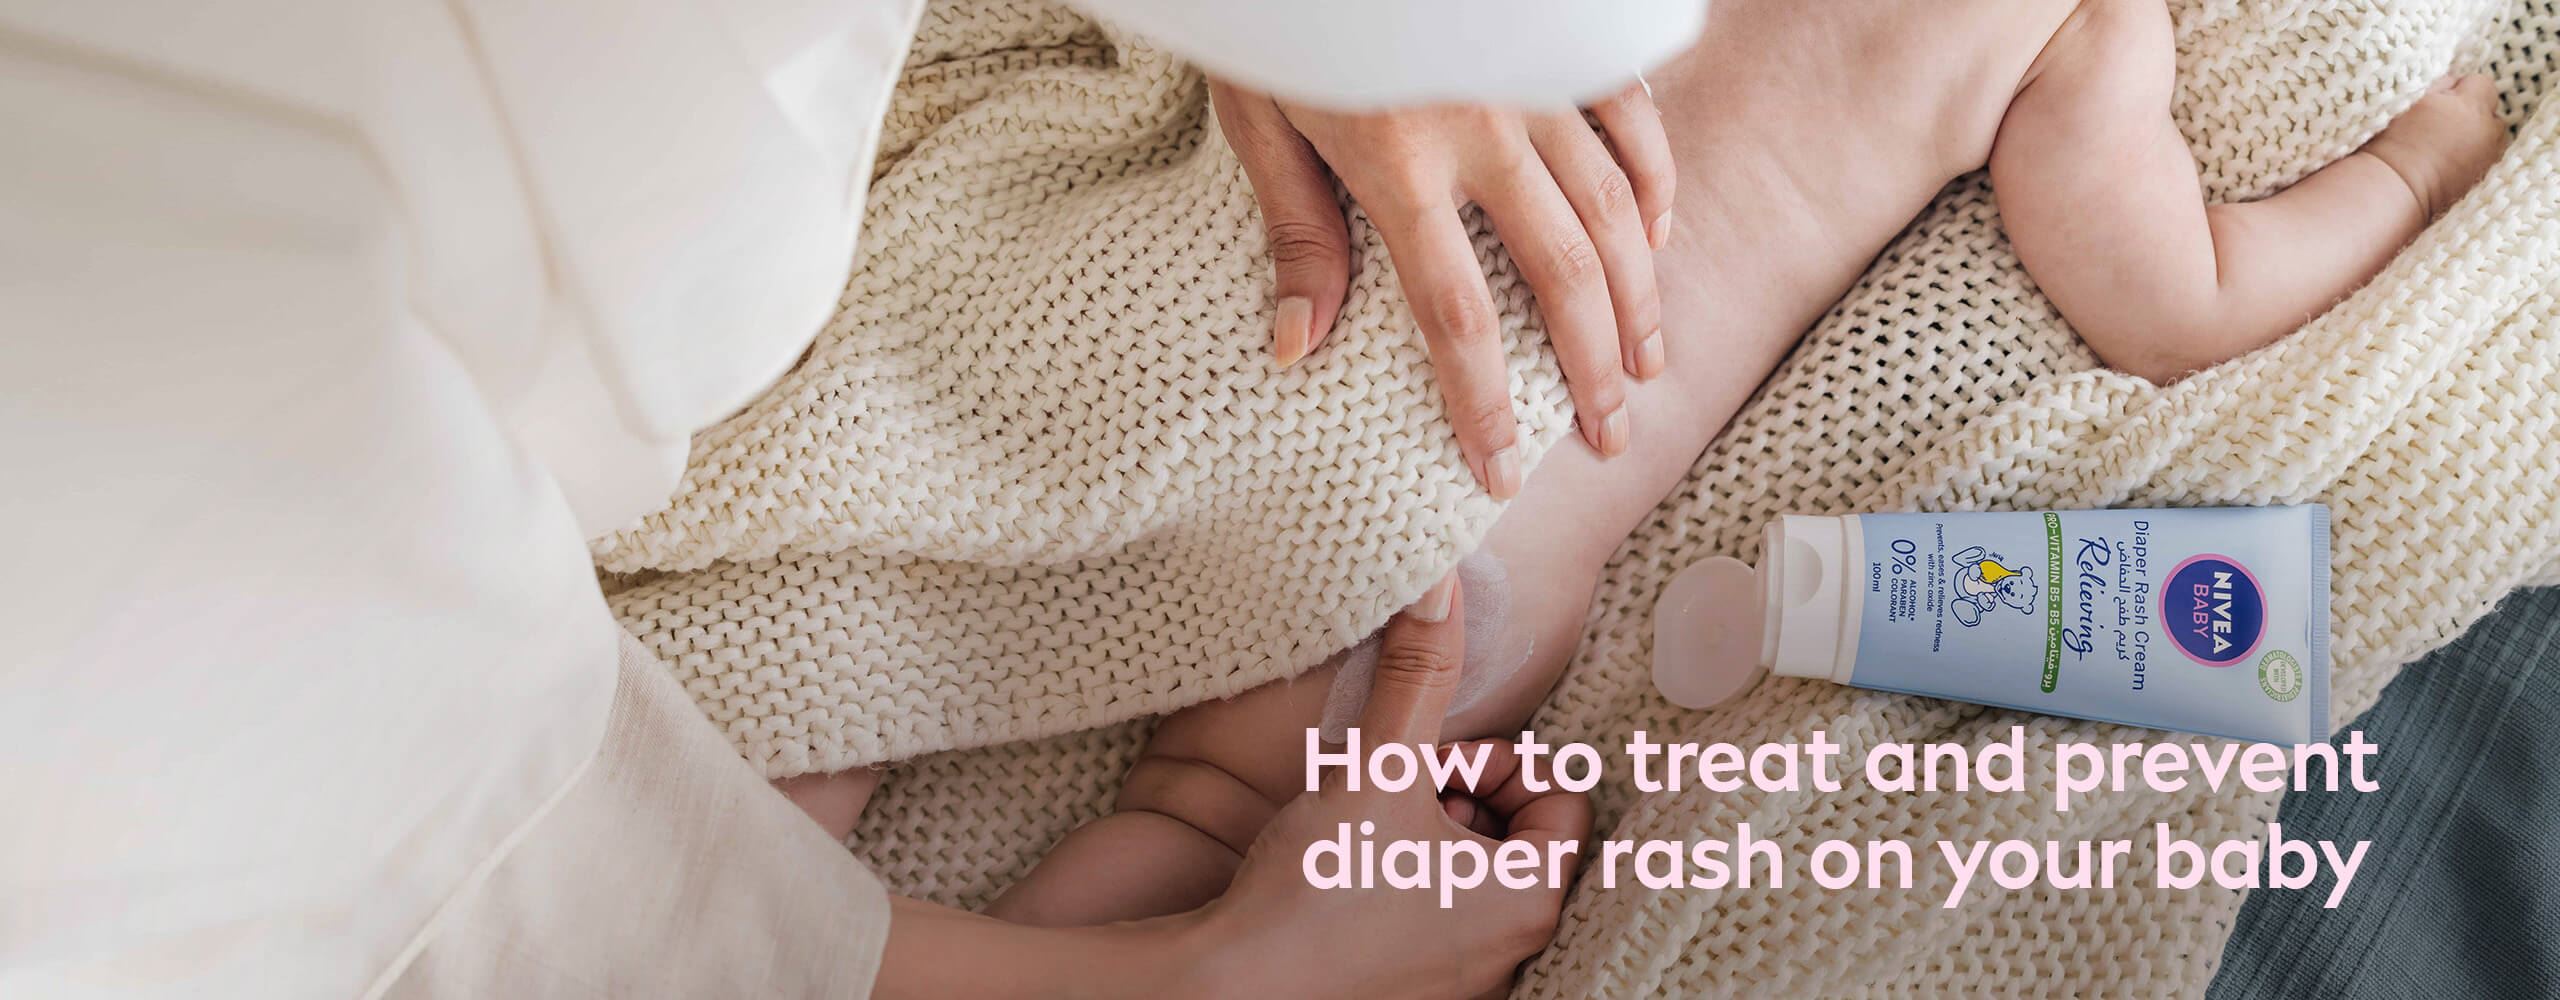 How to treat and prevent diaper rash on your baby